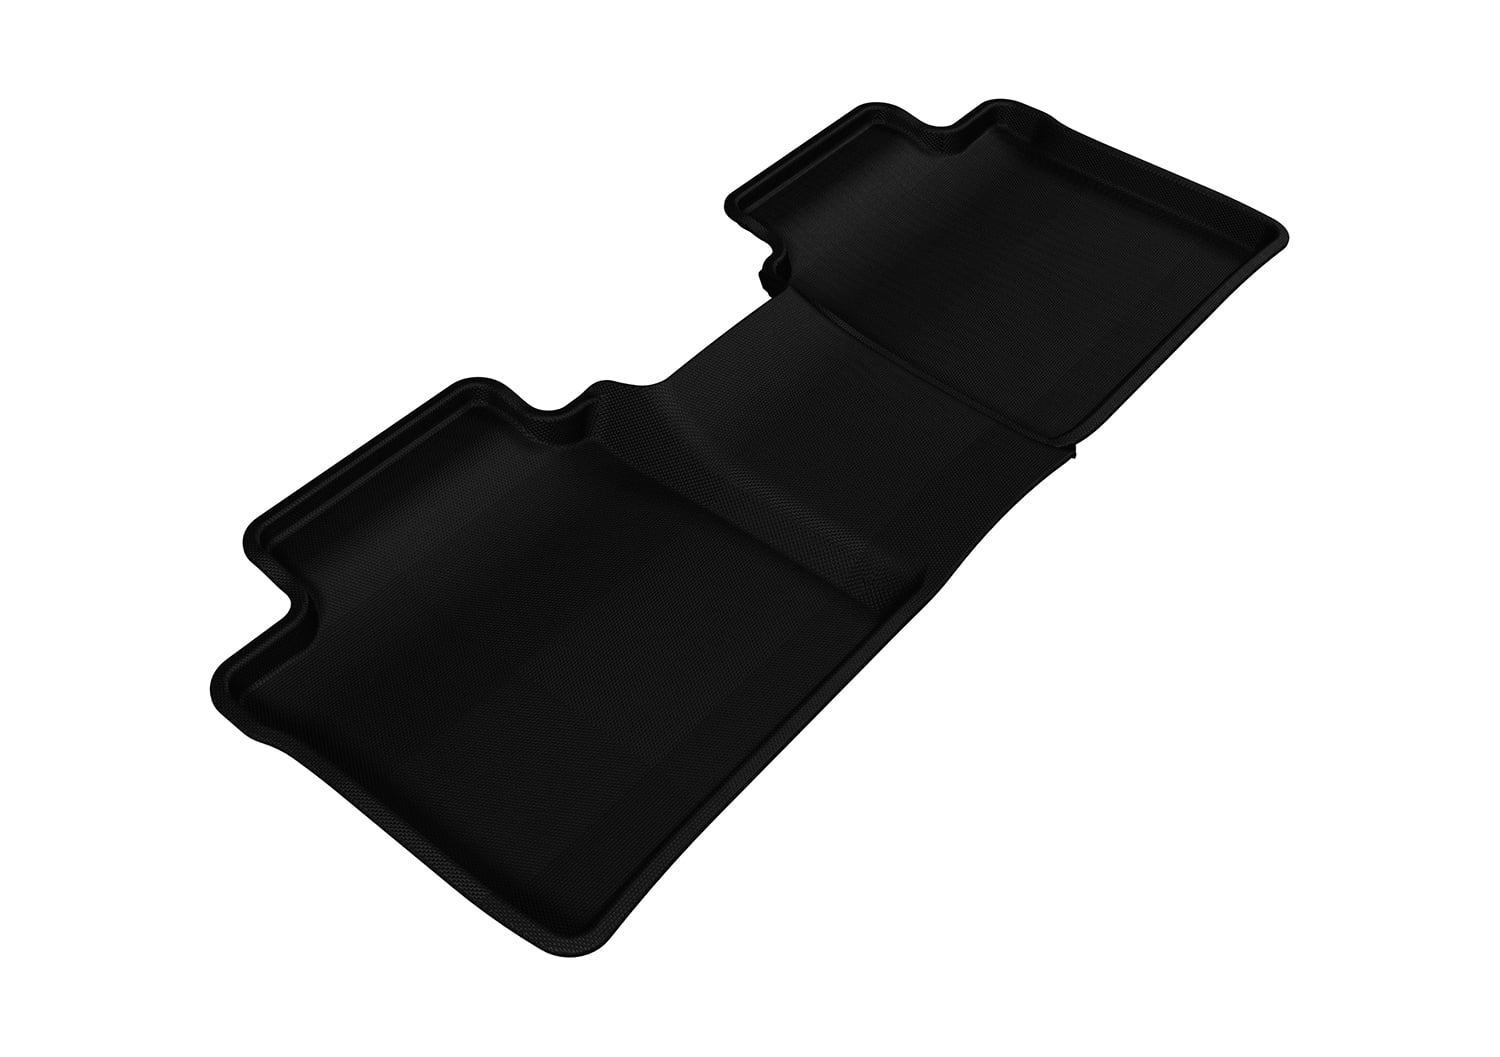 3D MAXpider Second Row Custom Fit All-Weather Floor Mat for Select Toyota Camry/Lexus ES350 Models Kagu Rubber Black 